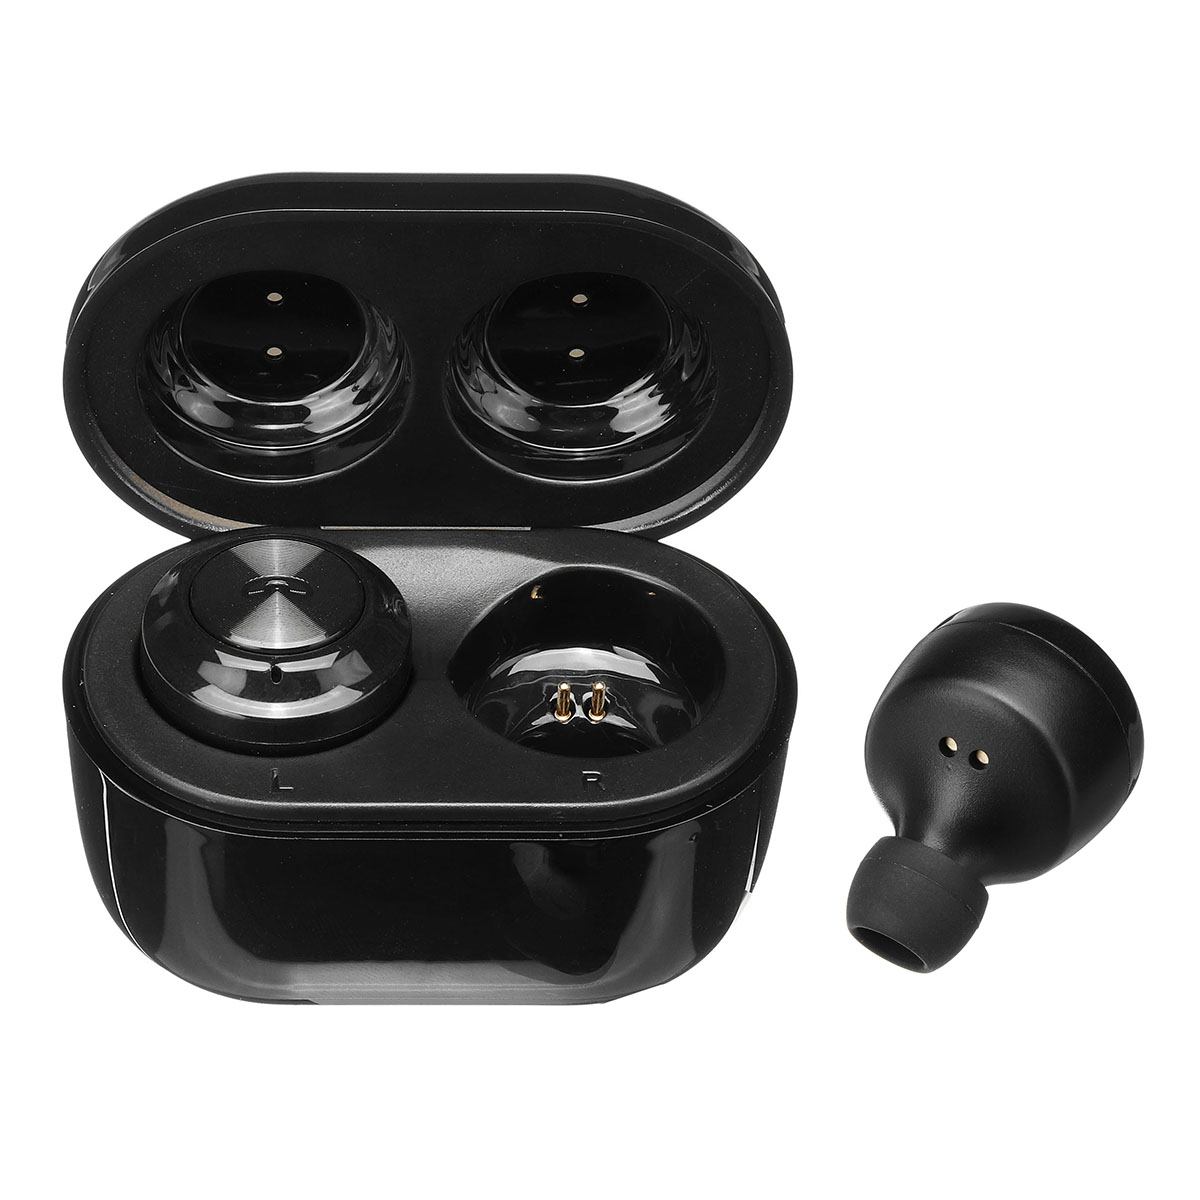 

[bluetooth 5.0] TWS True Wireless Earbuds Invisible Mini Noise Cancelling Stereo Earphone with Mic